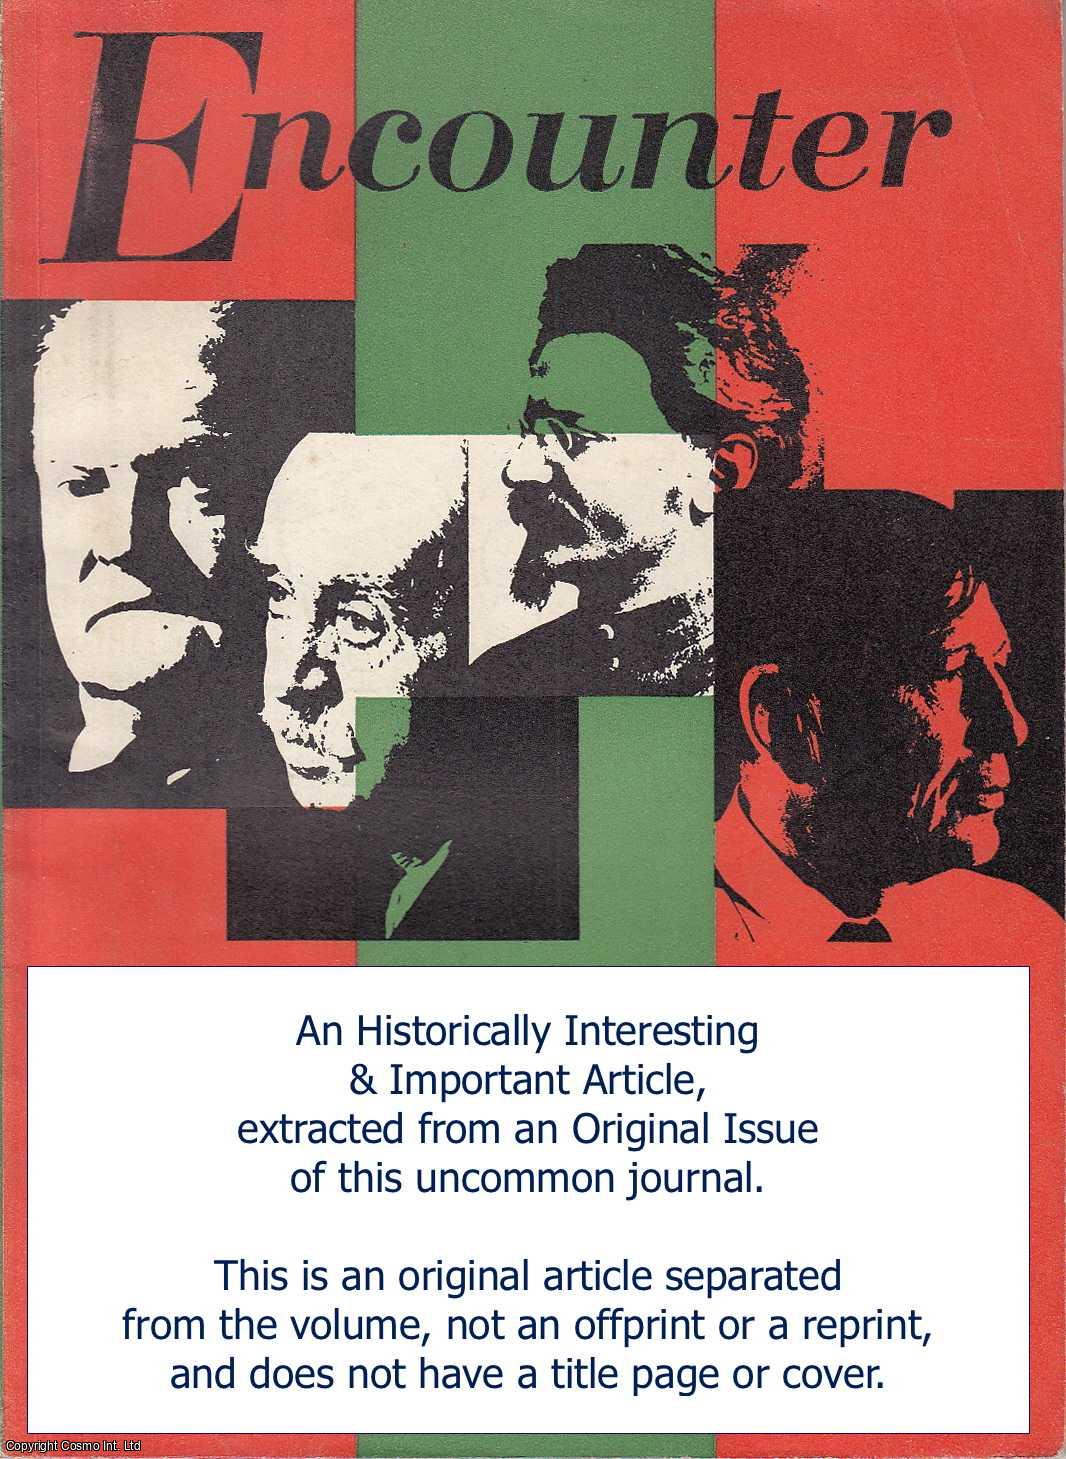 K.W. Gransden - E.M. Forster at Eighty. An original article from Encounter, a monthly review of literature, the arts and politics, 1959.